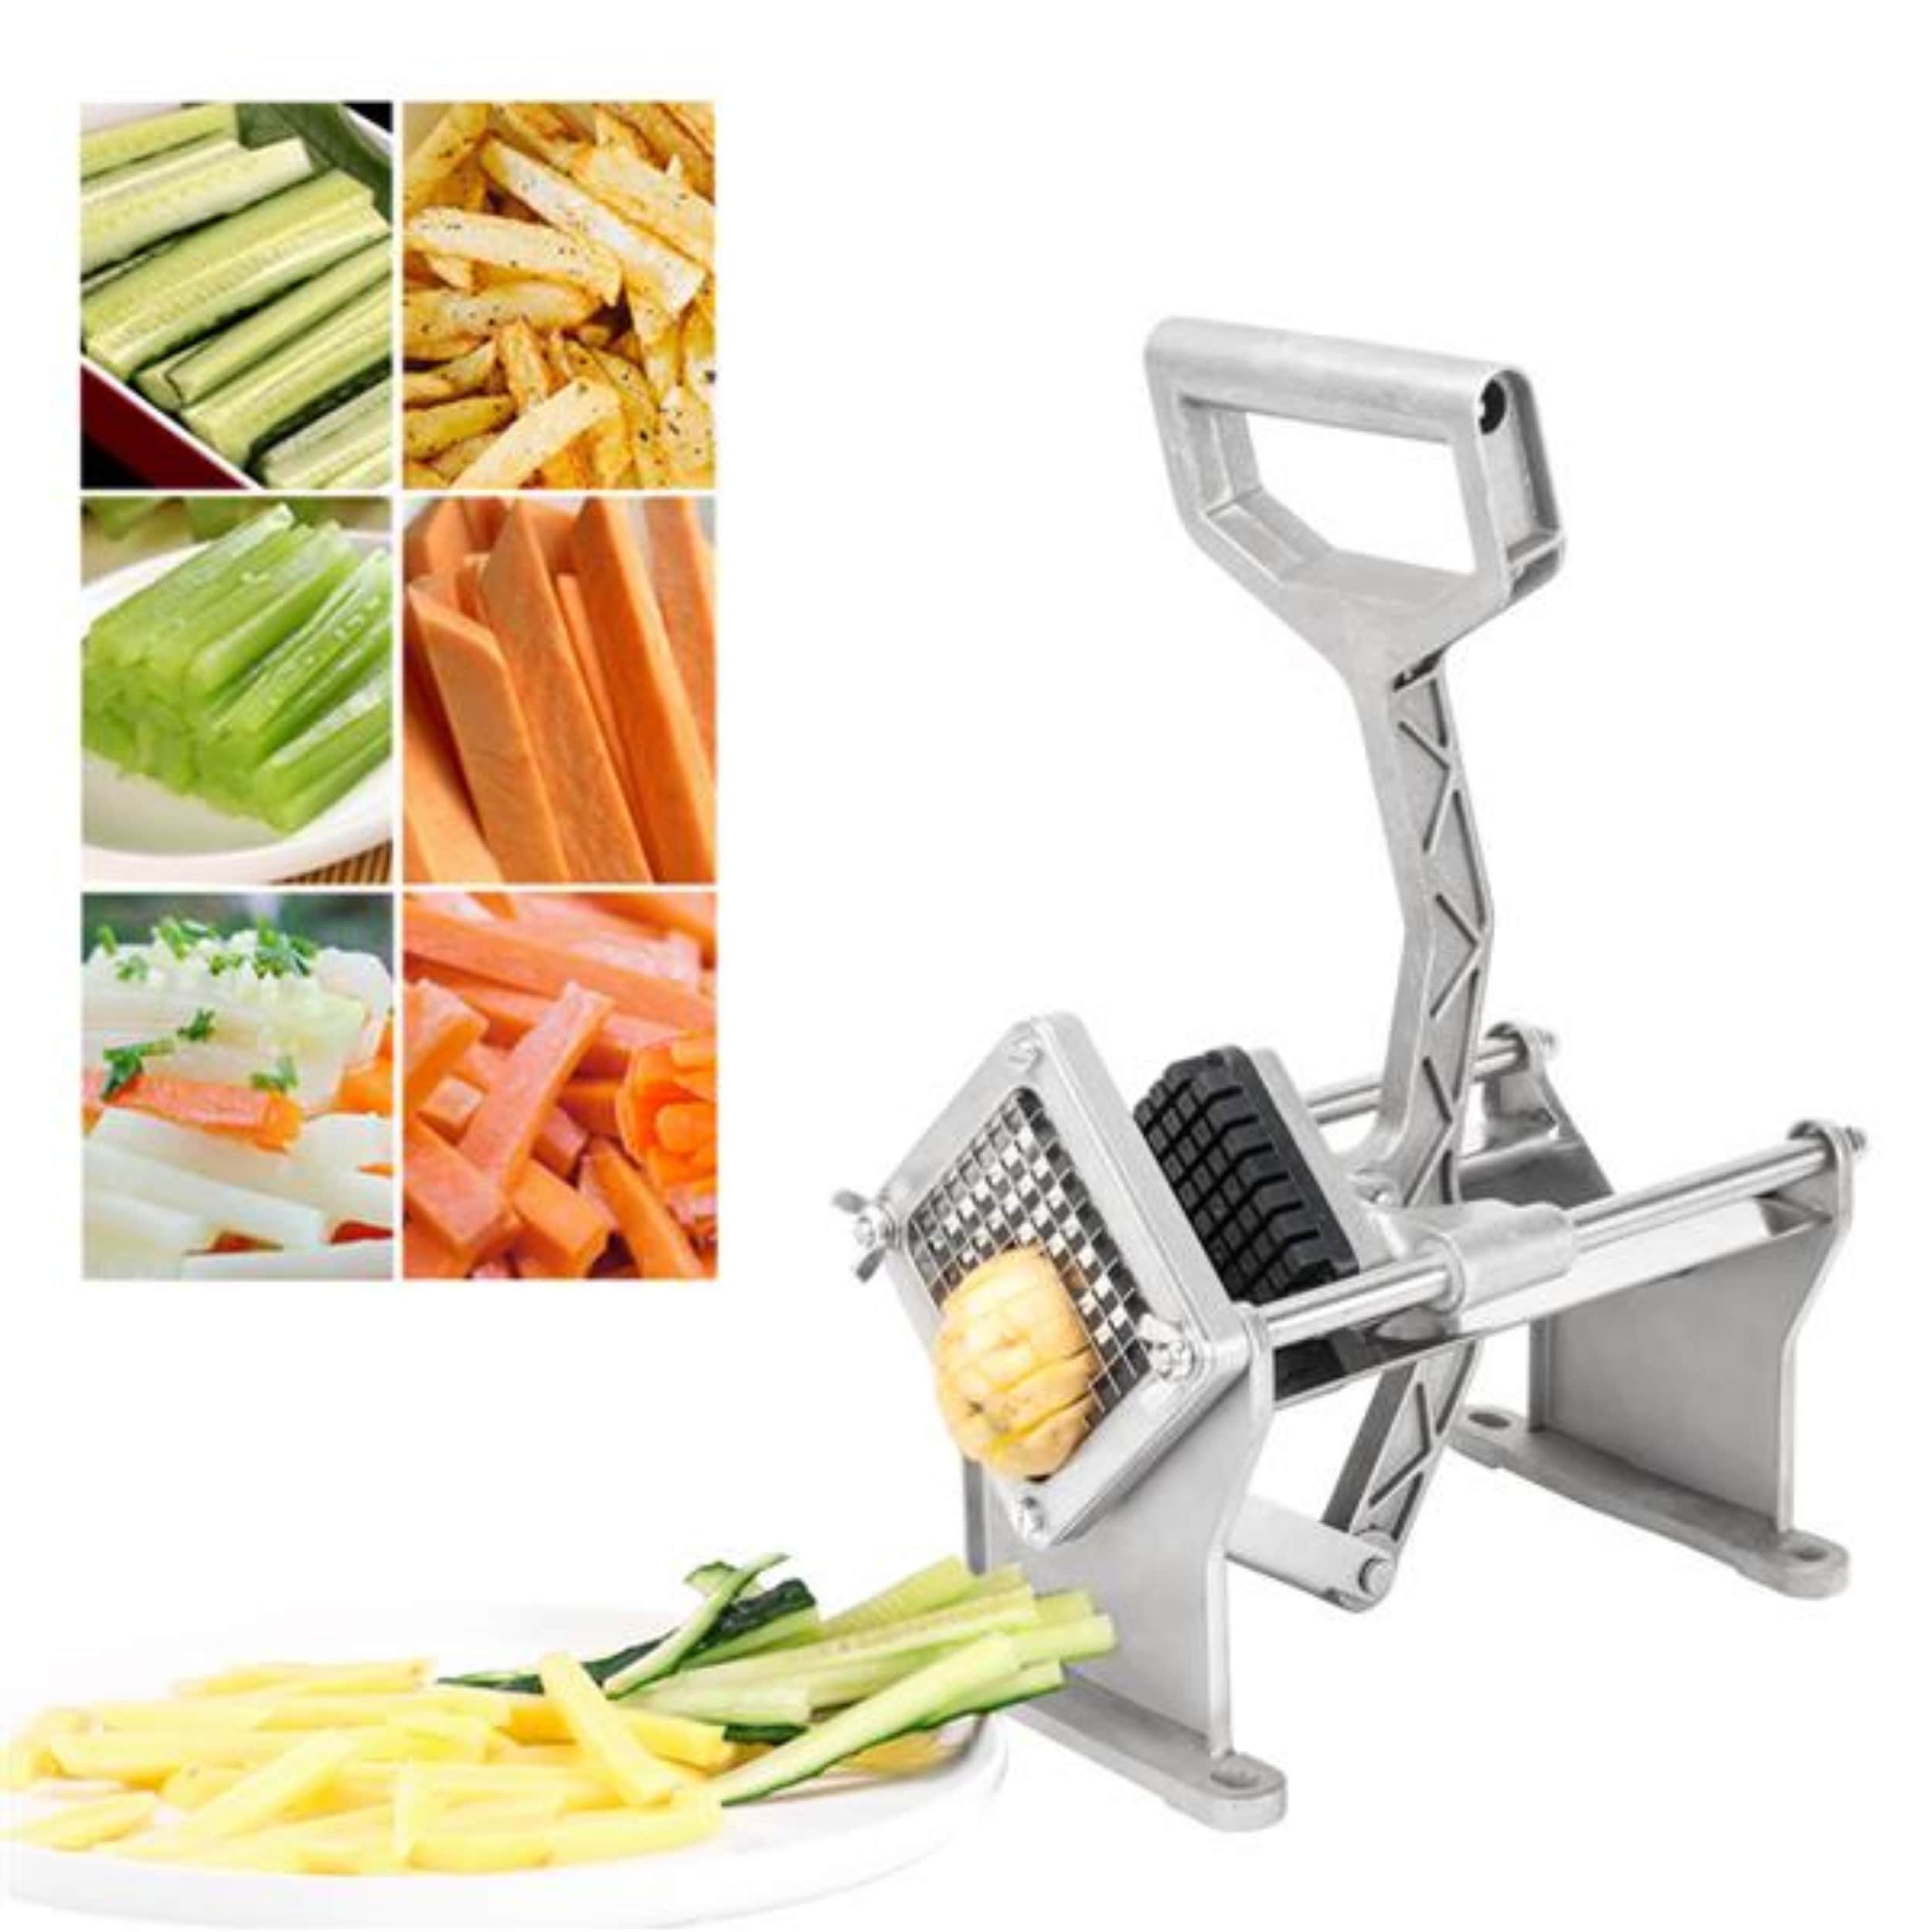 https://ak1.ostkcdn.com/images/products/is/images/direct/04e3c4afb2755d8abf0af308c864210b269746dc/Daily-Boutik-Vegetables-Slicer-Potato-Cutter-Commercial-French-Fry-Slicer-Cutters.jpg